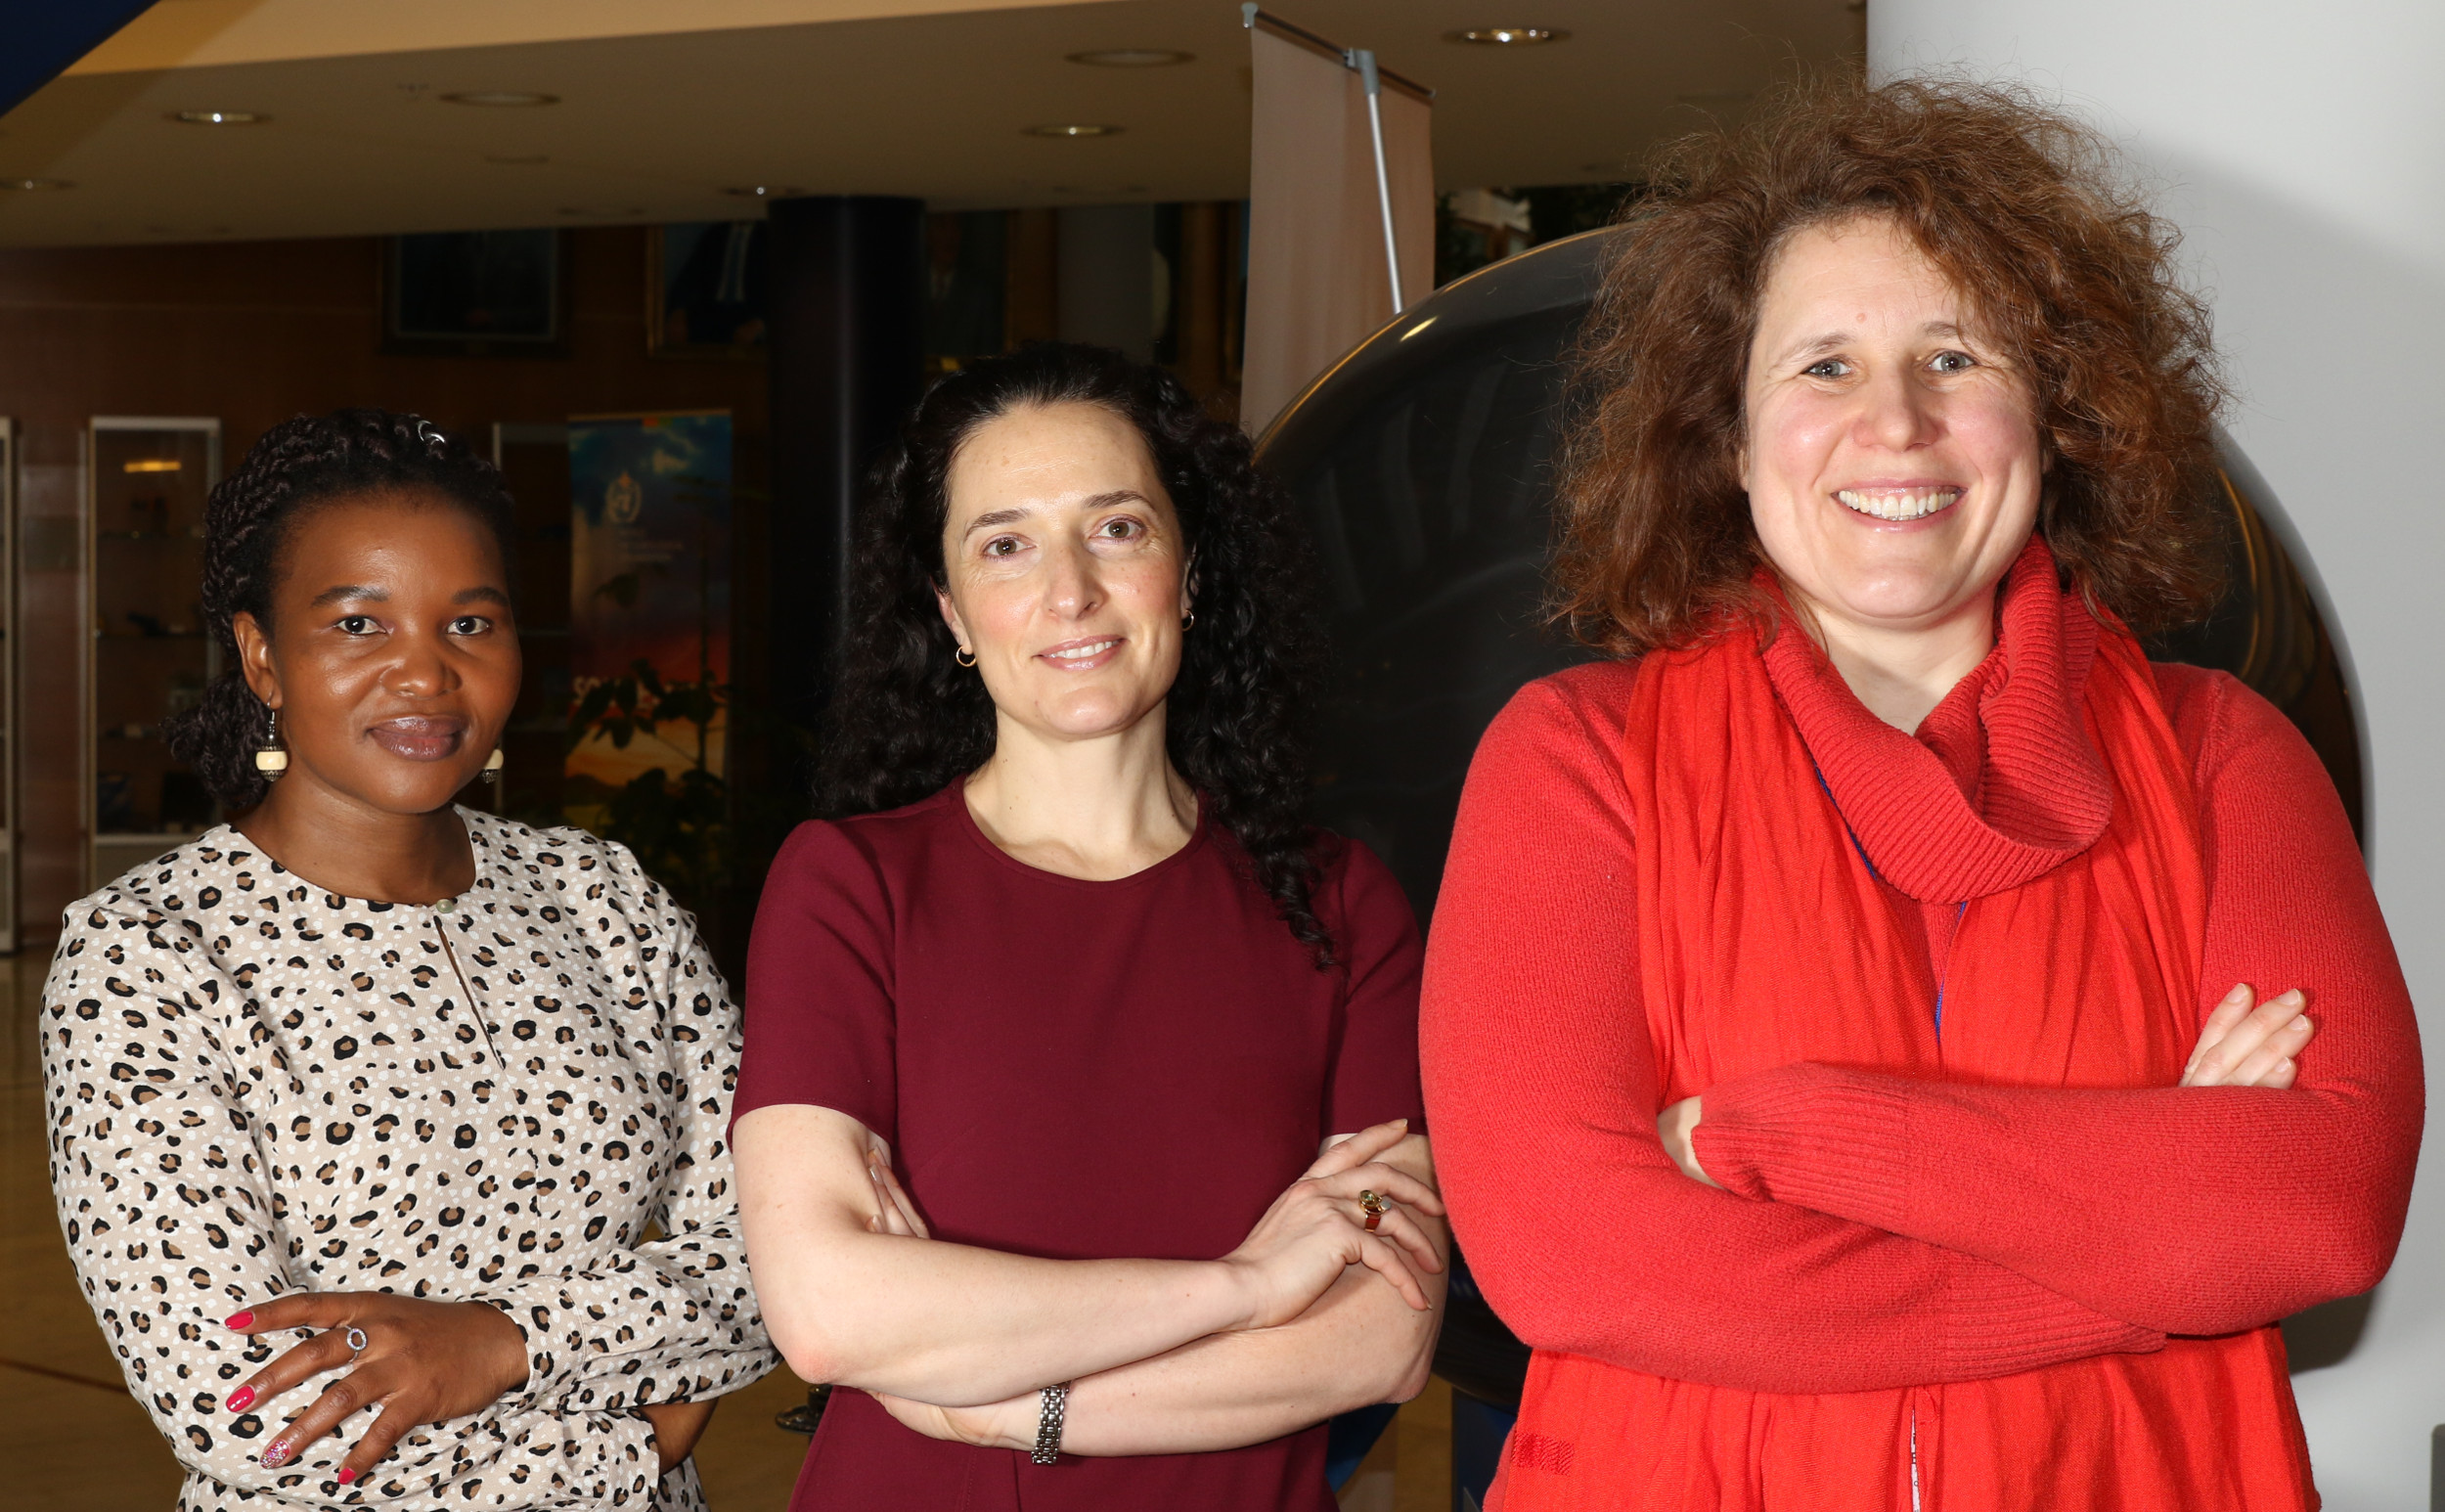 Meet three women leading the vision and strategy of the GEO Programme Board. (From left) Andiswa Mlisa, Yana Gevorgyan, Nathalie Pettorelli discuss their passion for Earth observations.